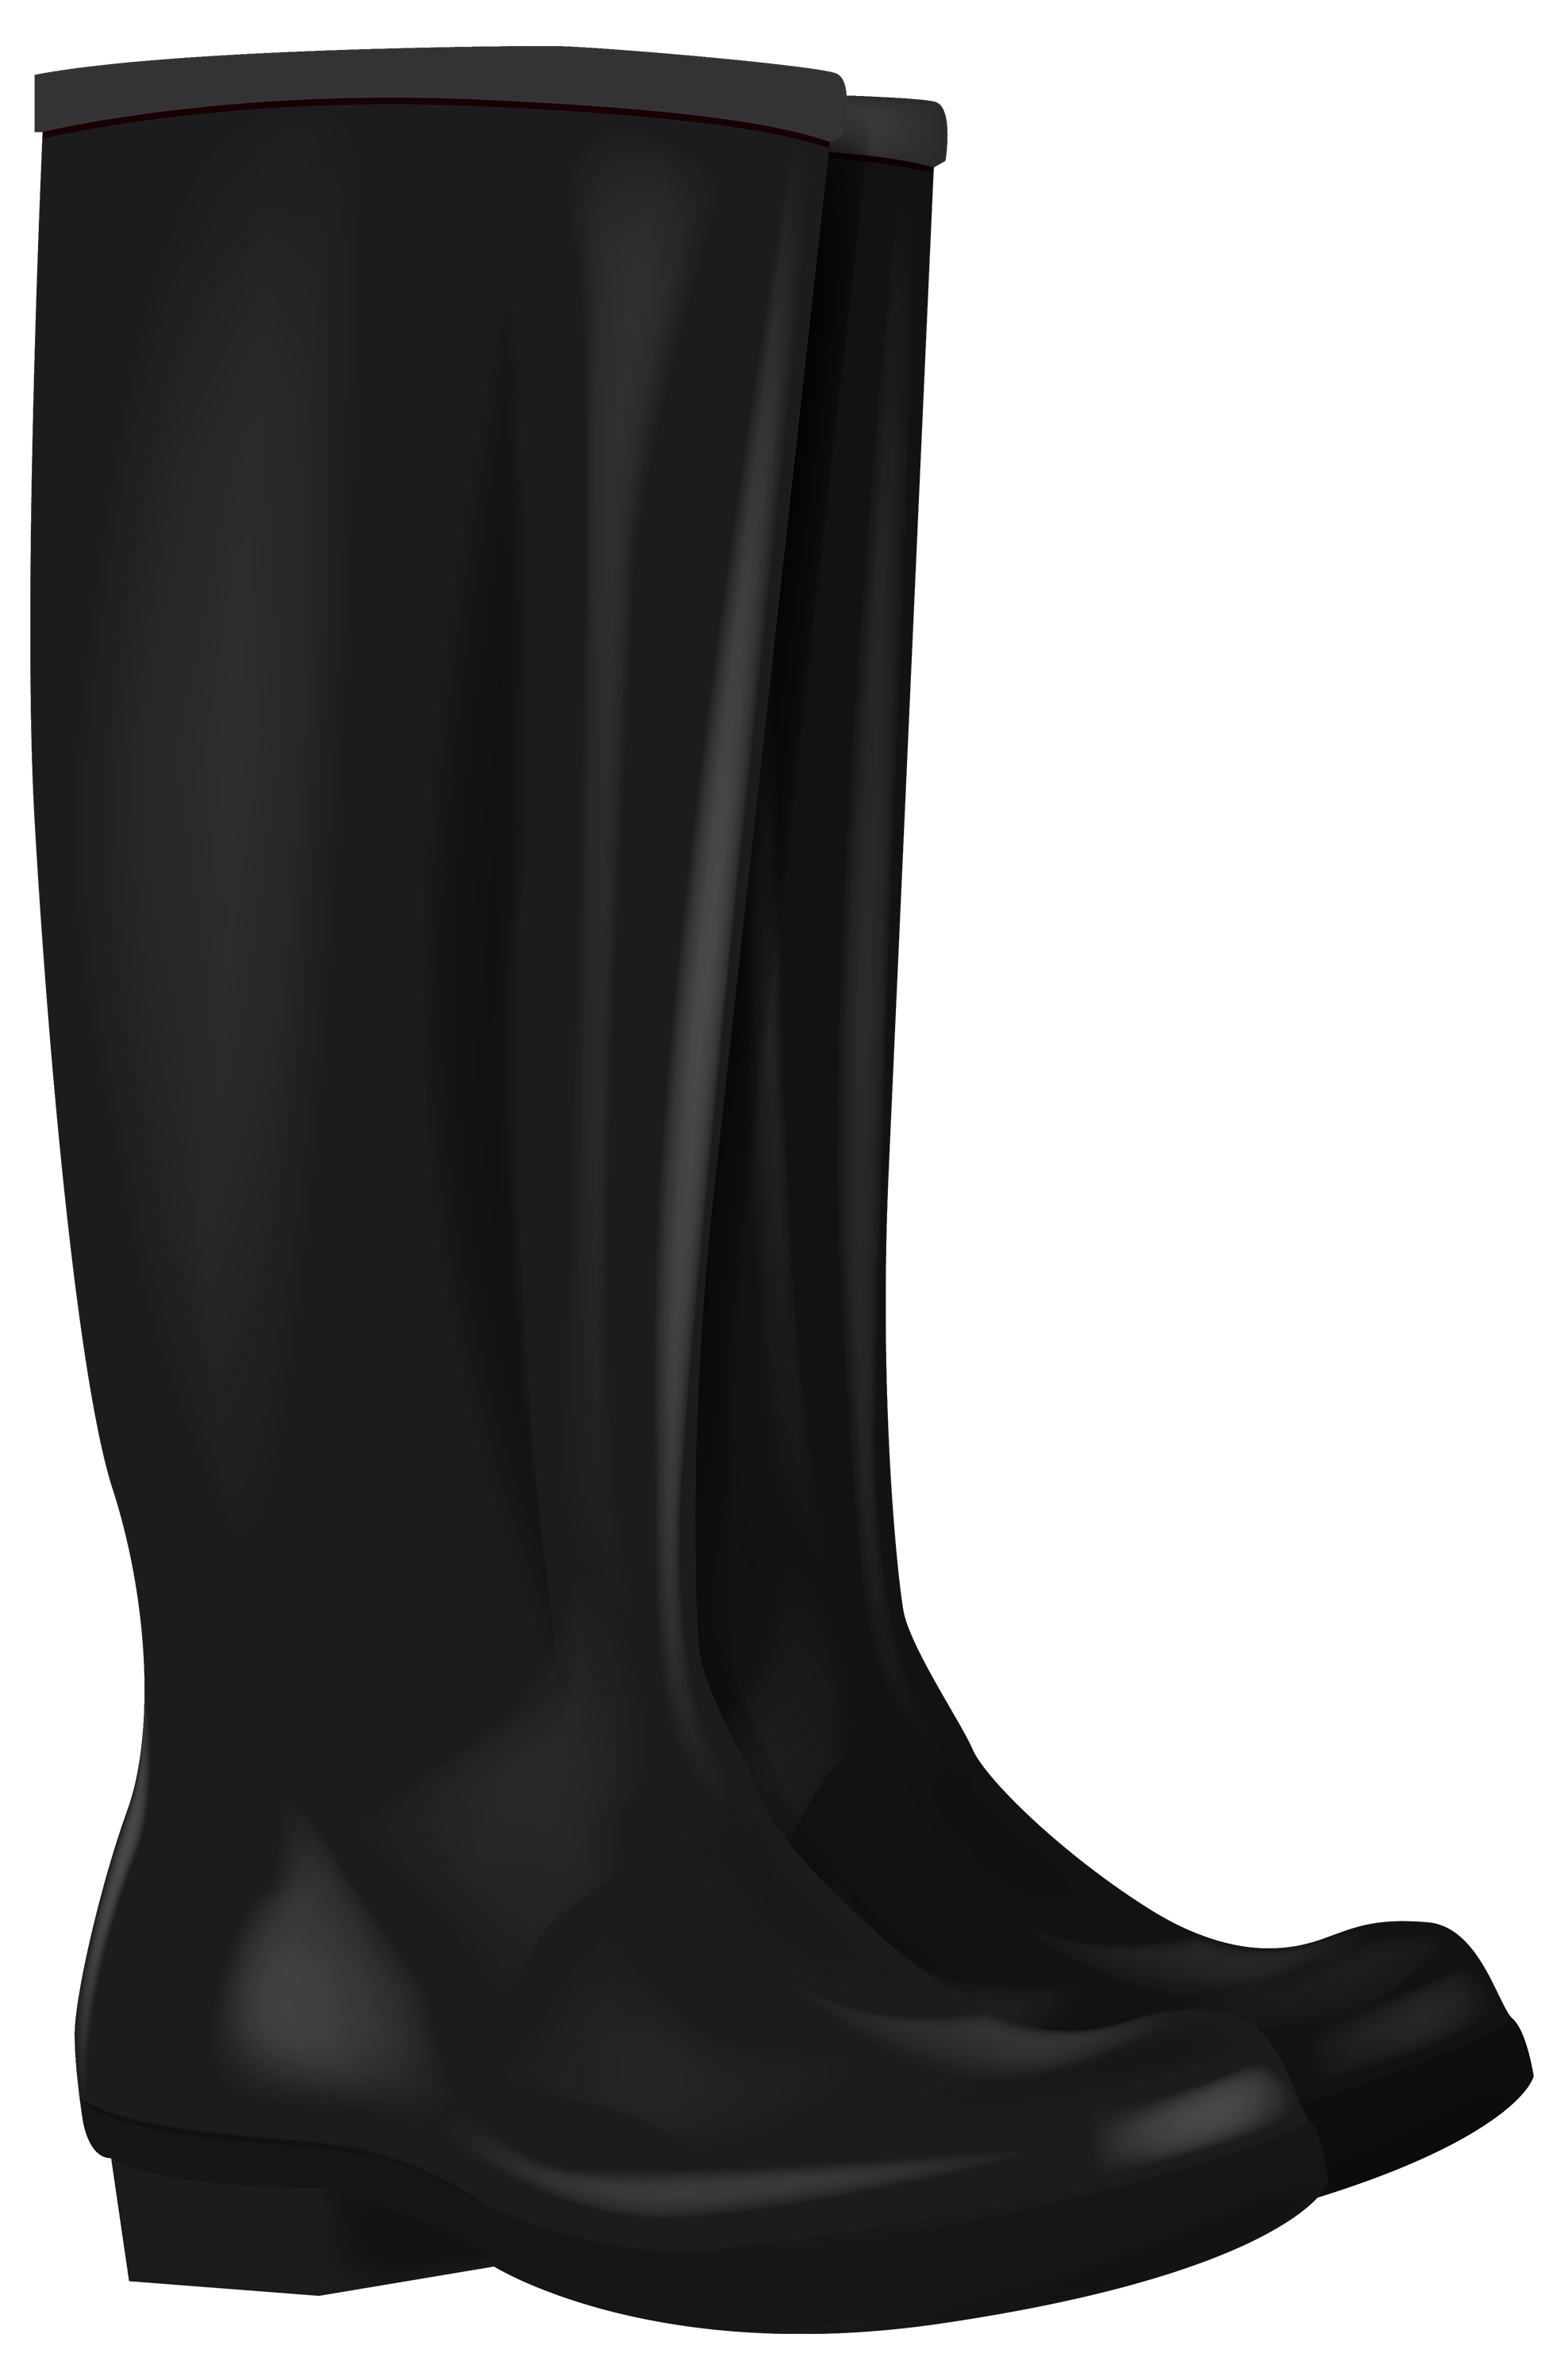 Black Rubber Boots PNG Clipart